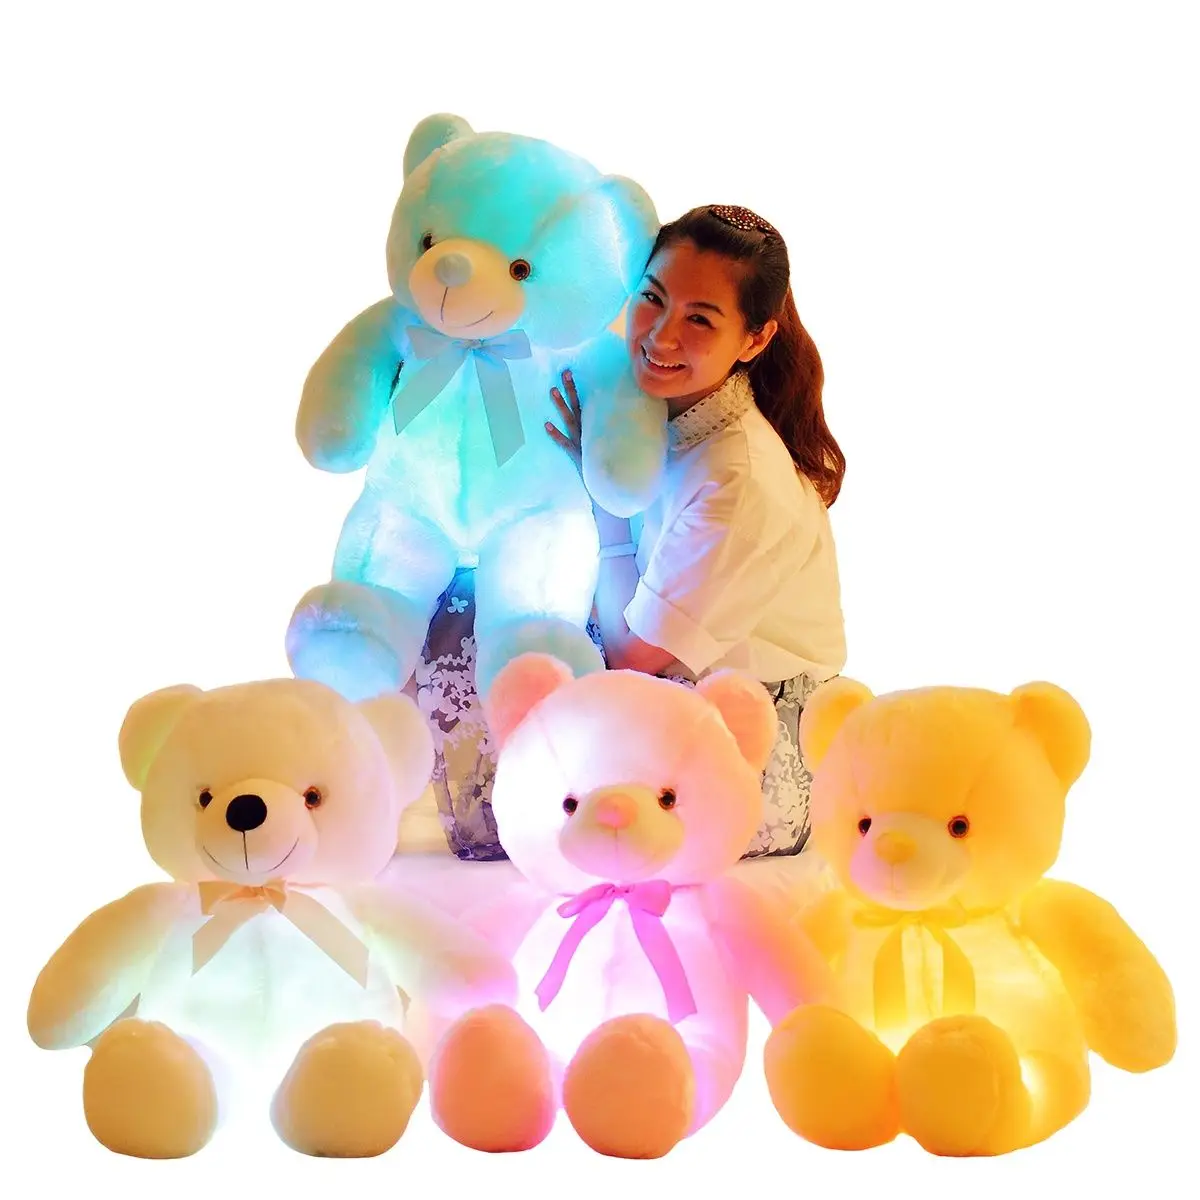 

Luminous 25/30/50cm Creative Light Up LED Colorful Glowing Teddy Bear Stuffed Animal Plush Toy Christmas Gifts For Kids